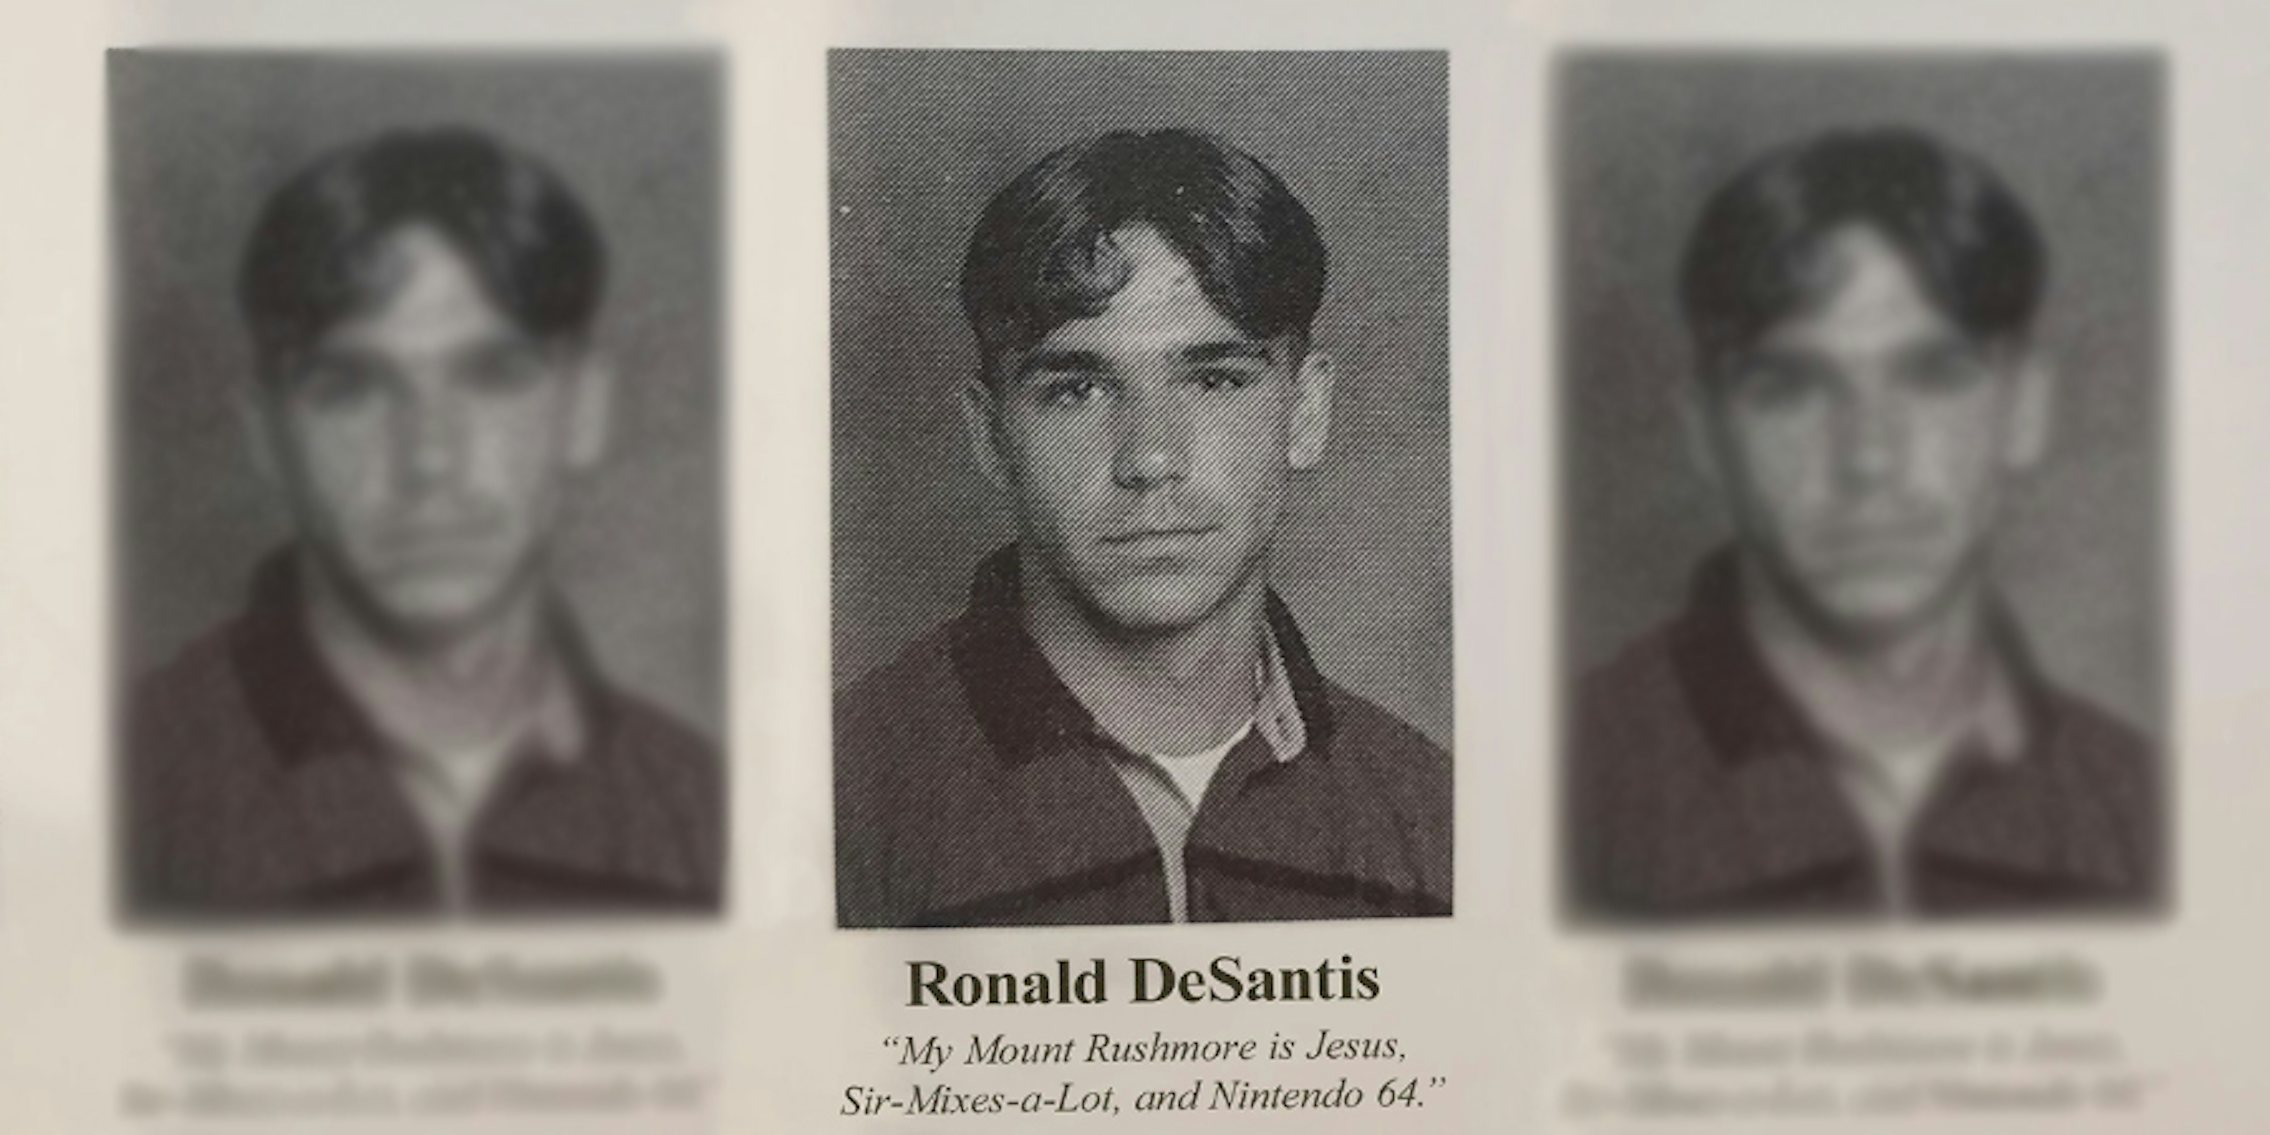 Ronald DeSantis yearbook photos right and left blurred with center photo captioned 'Ronald DeSantis 'My Mount Rushmore is Jesus Sir-Mixes-a-Lot, and Nintendo 64''